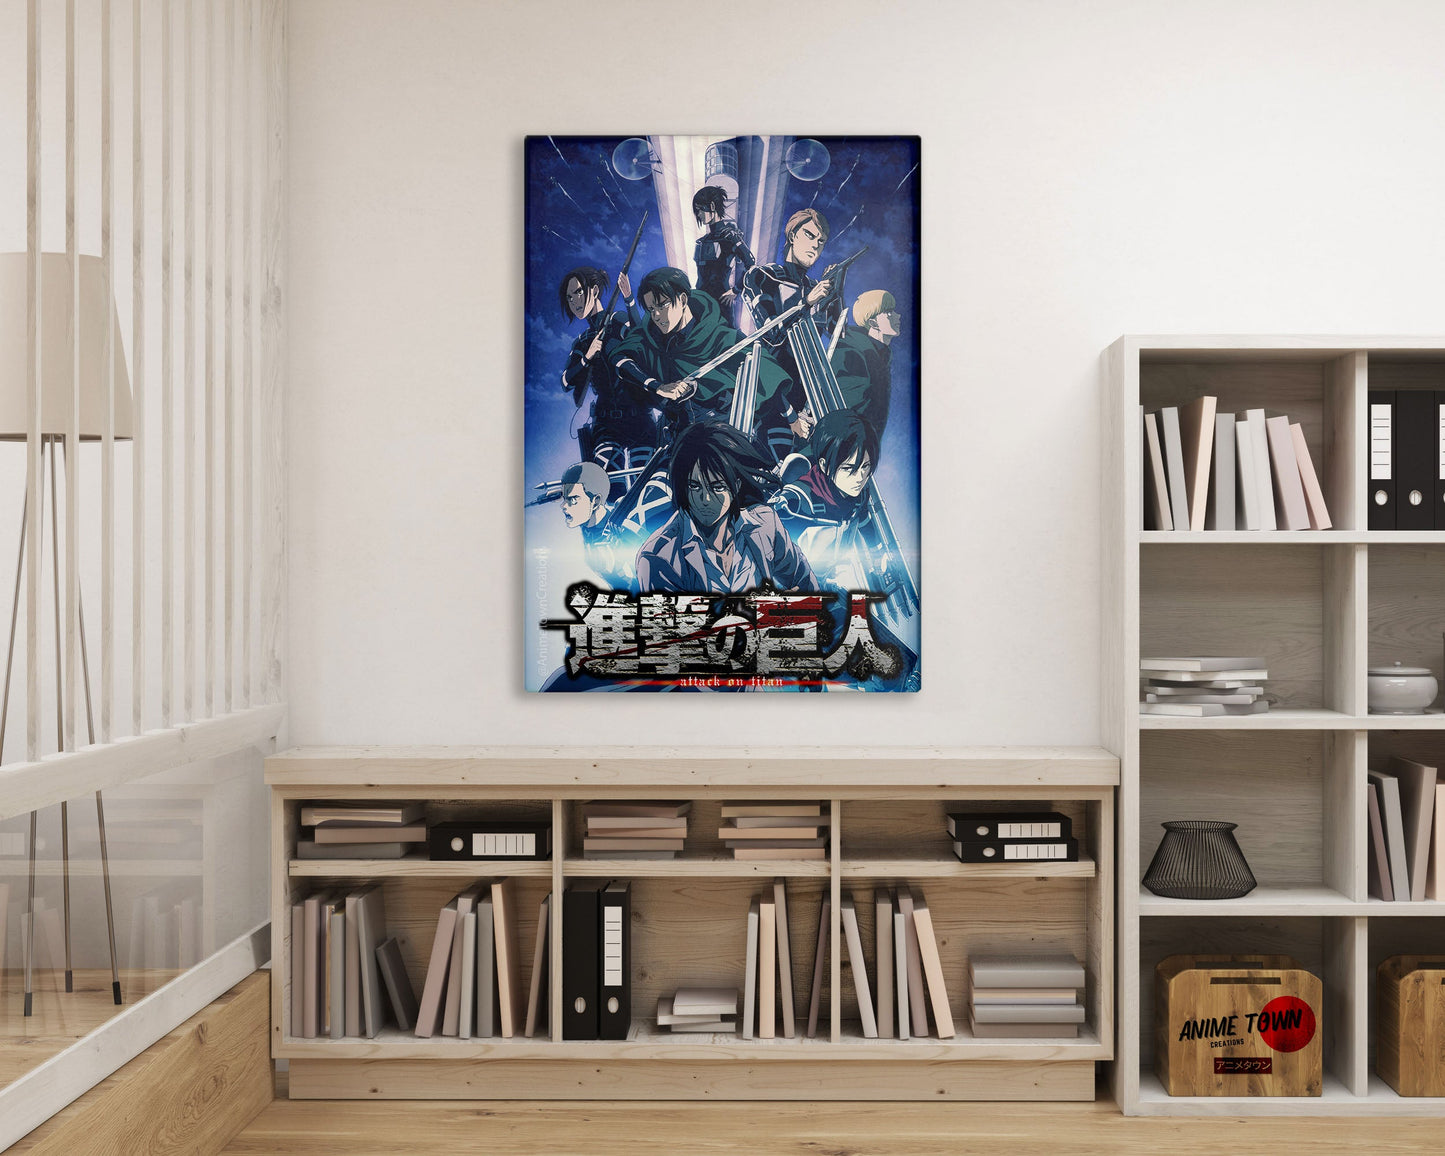 Anime Town Creations Metal Poster Attack on Titan The Final Season 16" x 24" Home Goods - Anime Attack on Titan Metal Poster